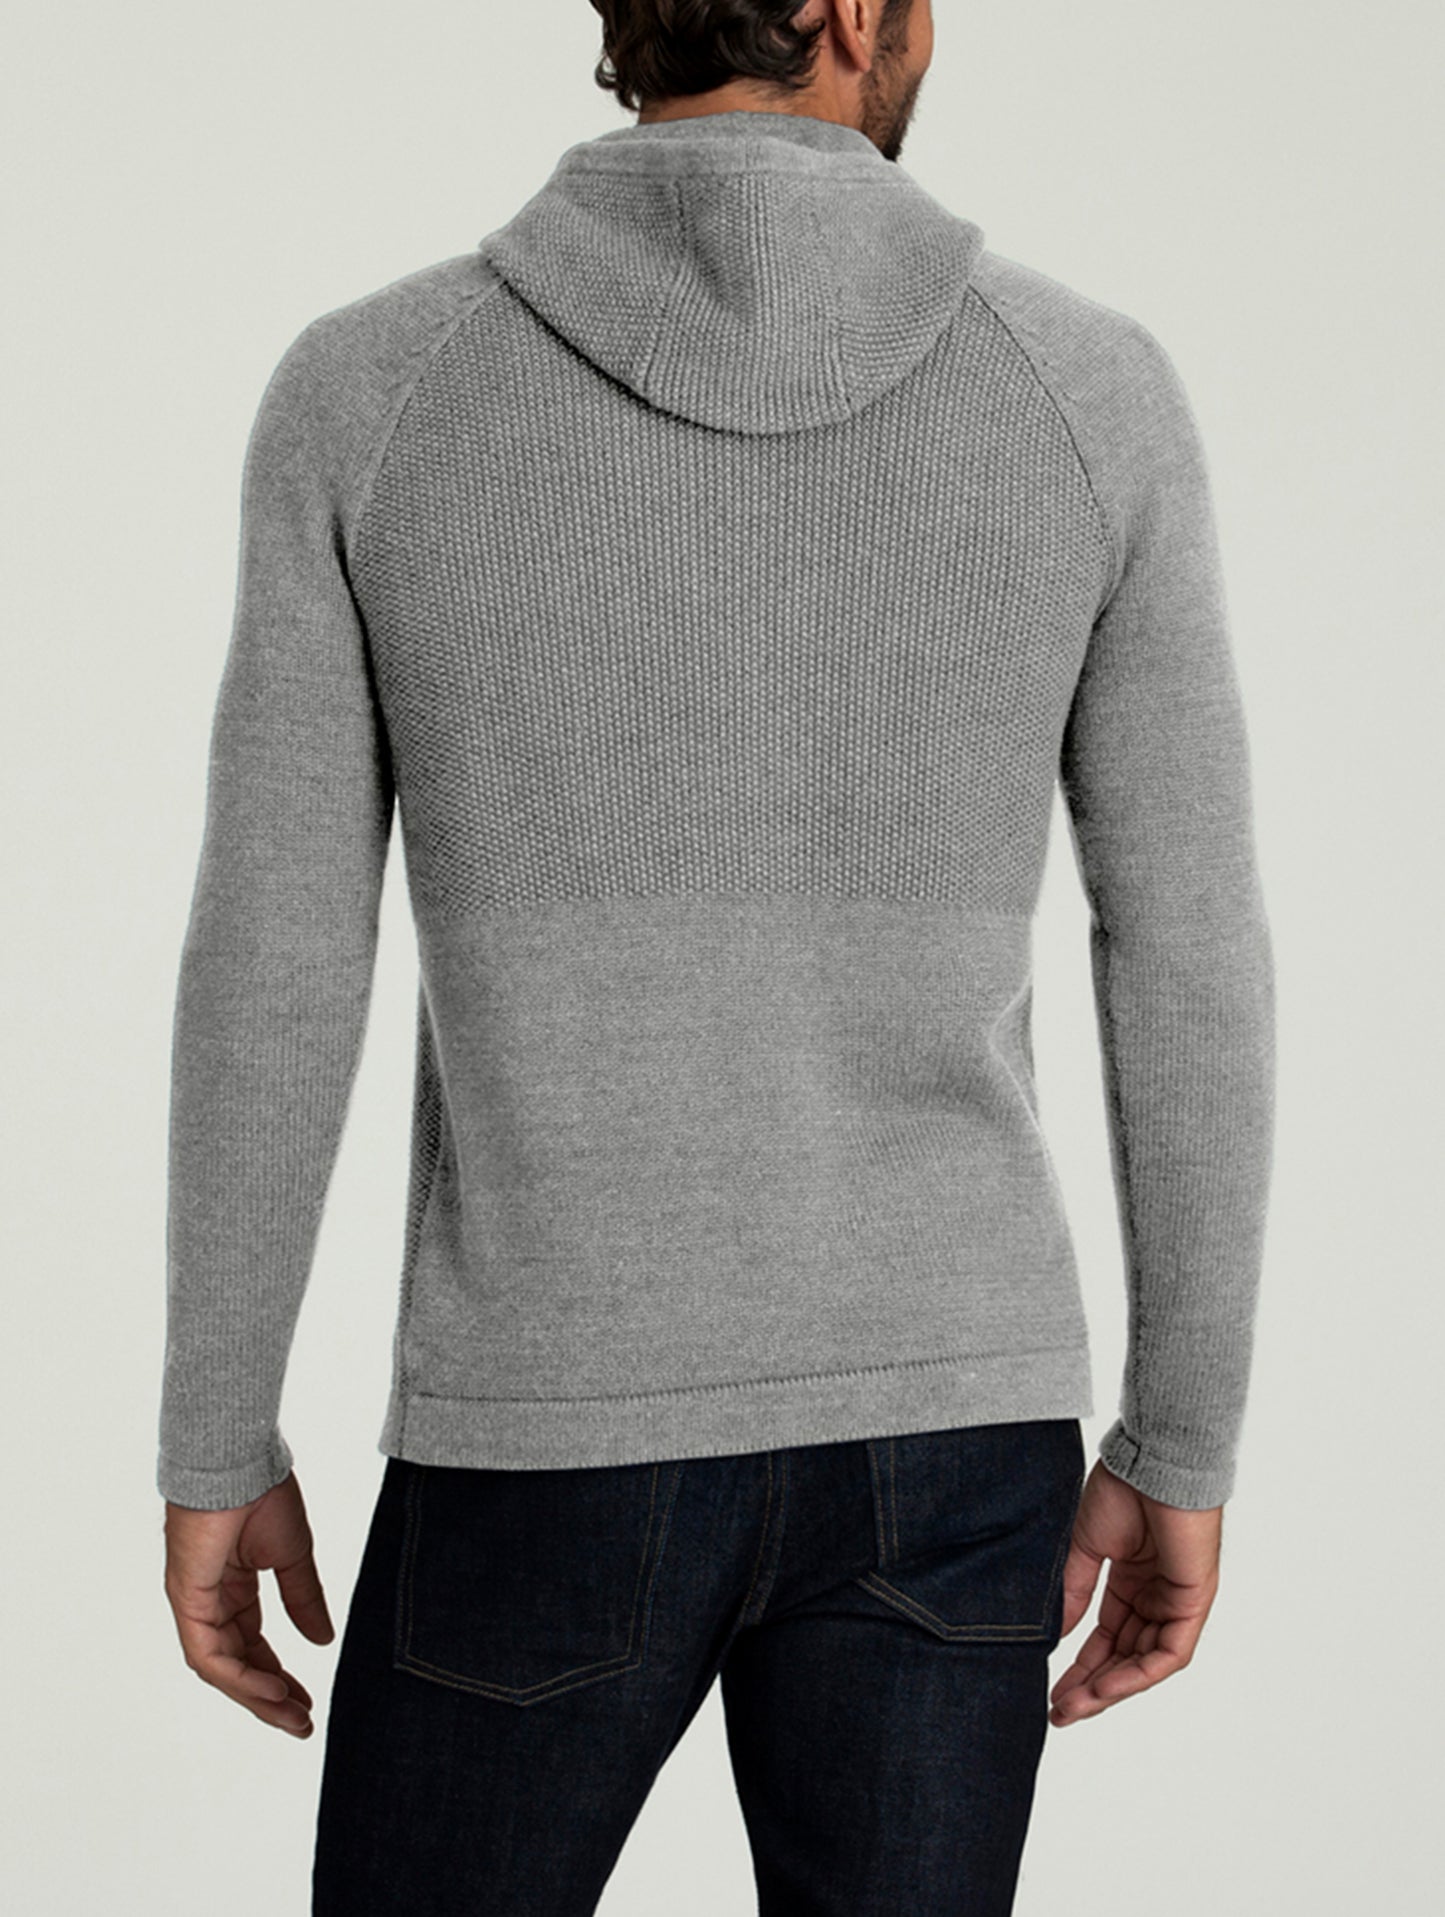 grey hooded sweater for men